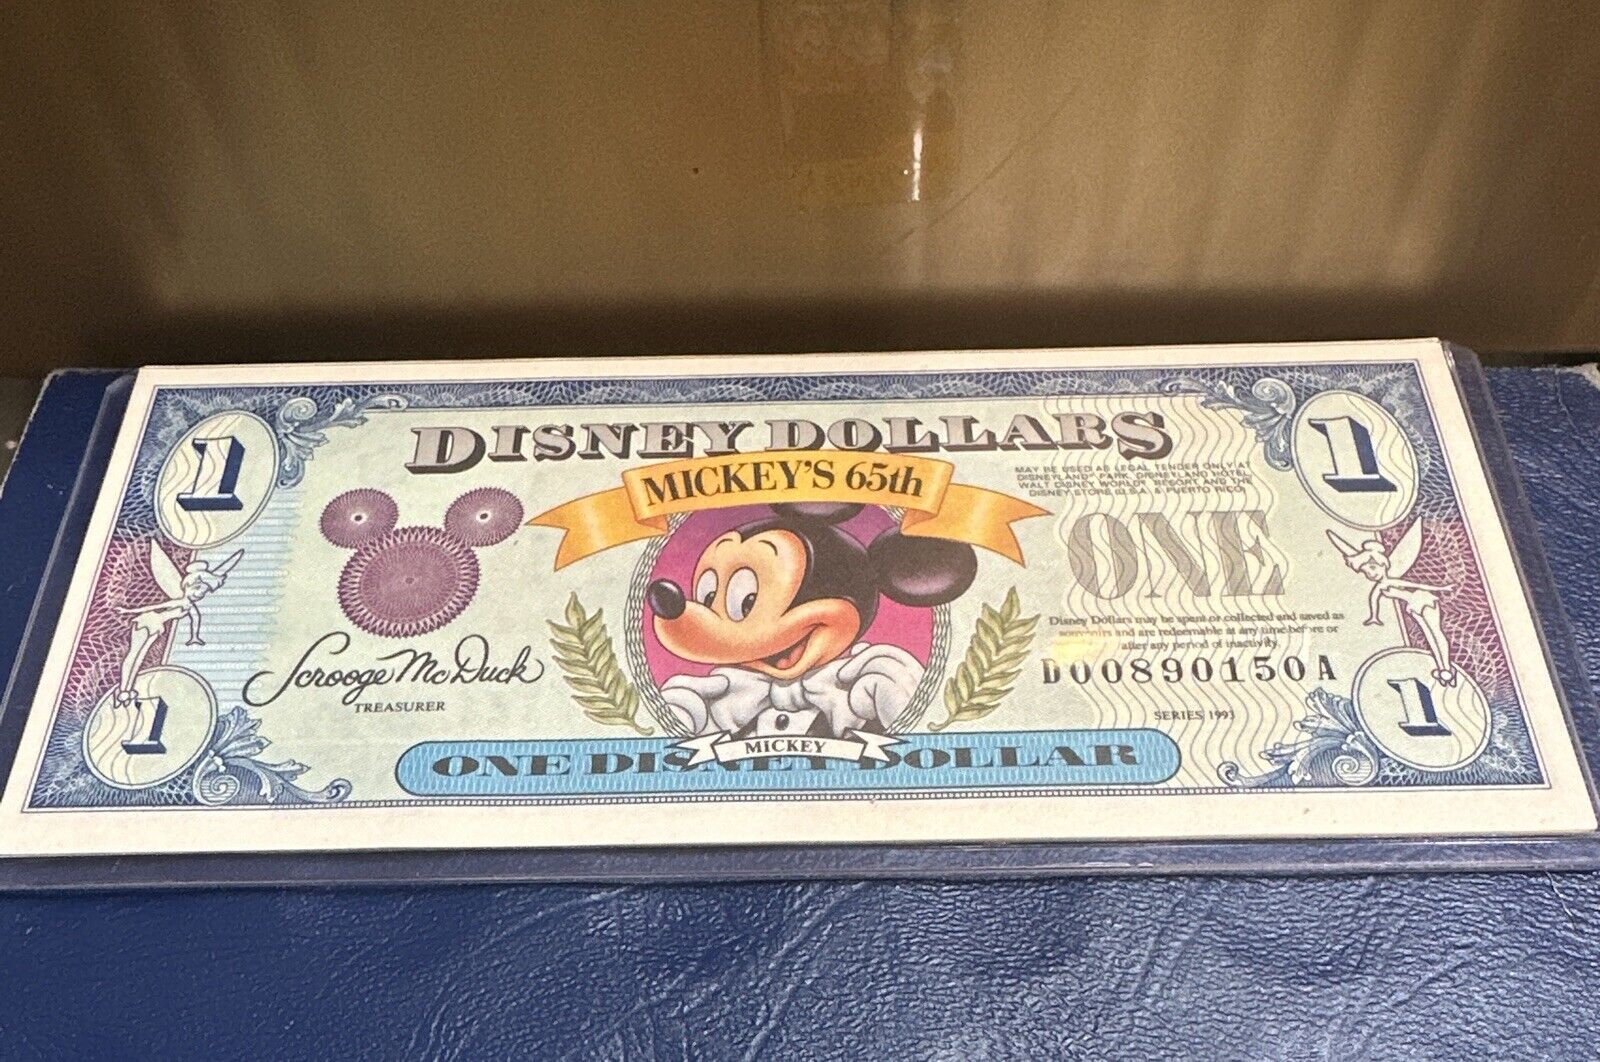 1993 $1 One Disney Dollar Mickey Mouse 65th Anniversary Note Uncirculated